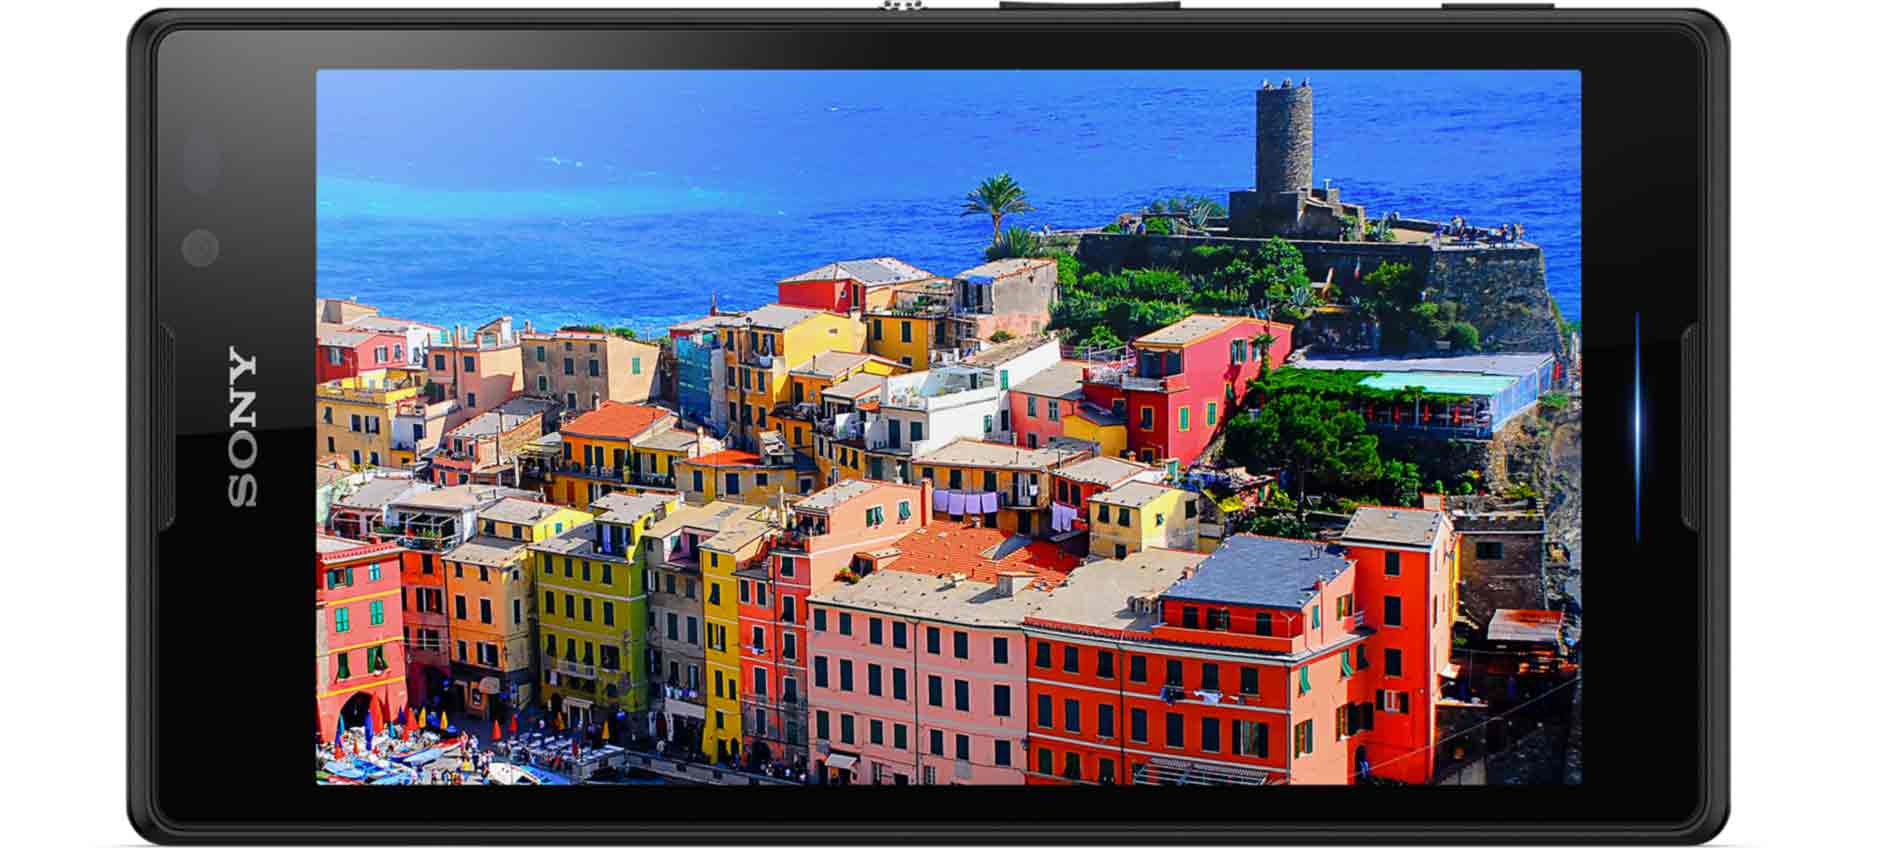 xperia-c-features-display-amazing-viewing-experience-1880x940-705e68db32d5f6bb08d7509f3d507484.jpg